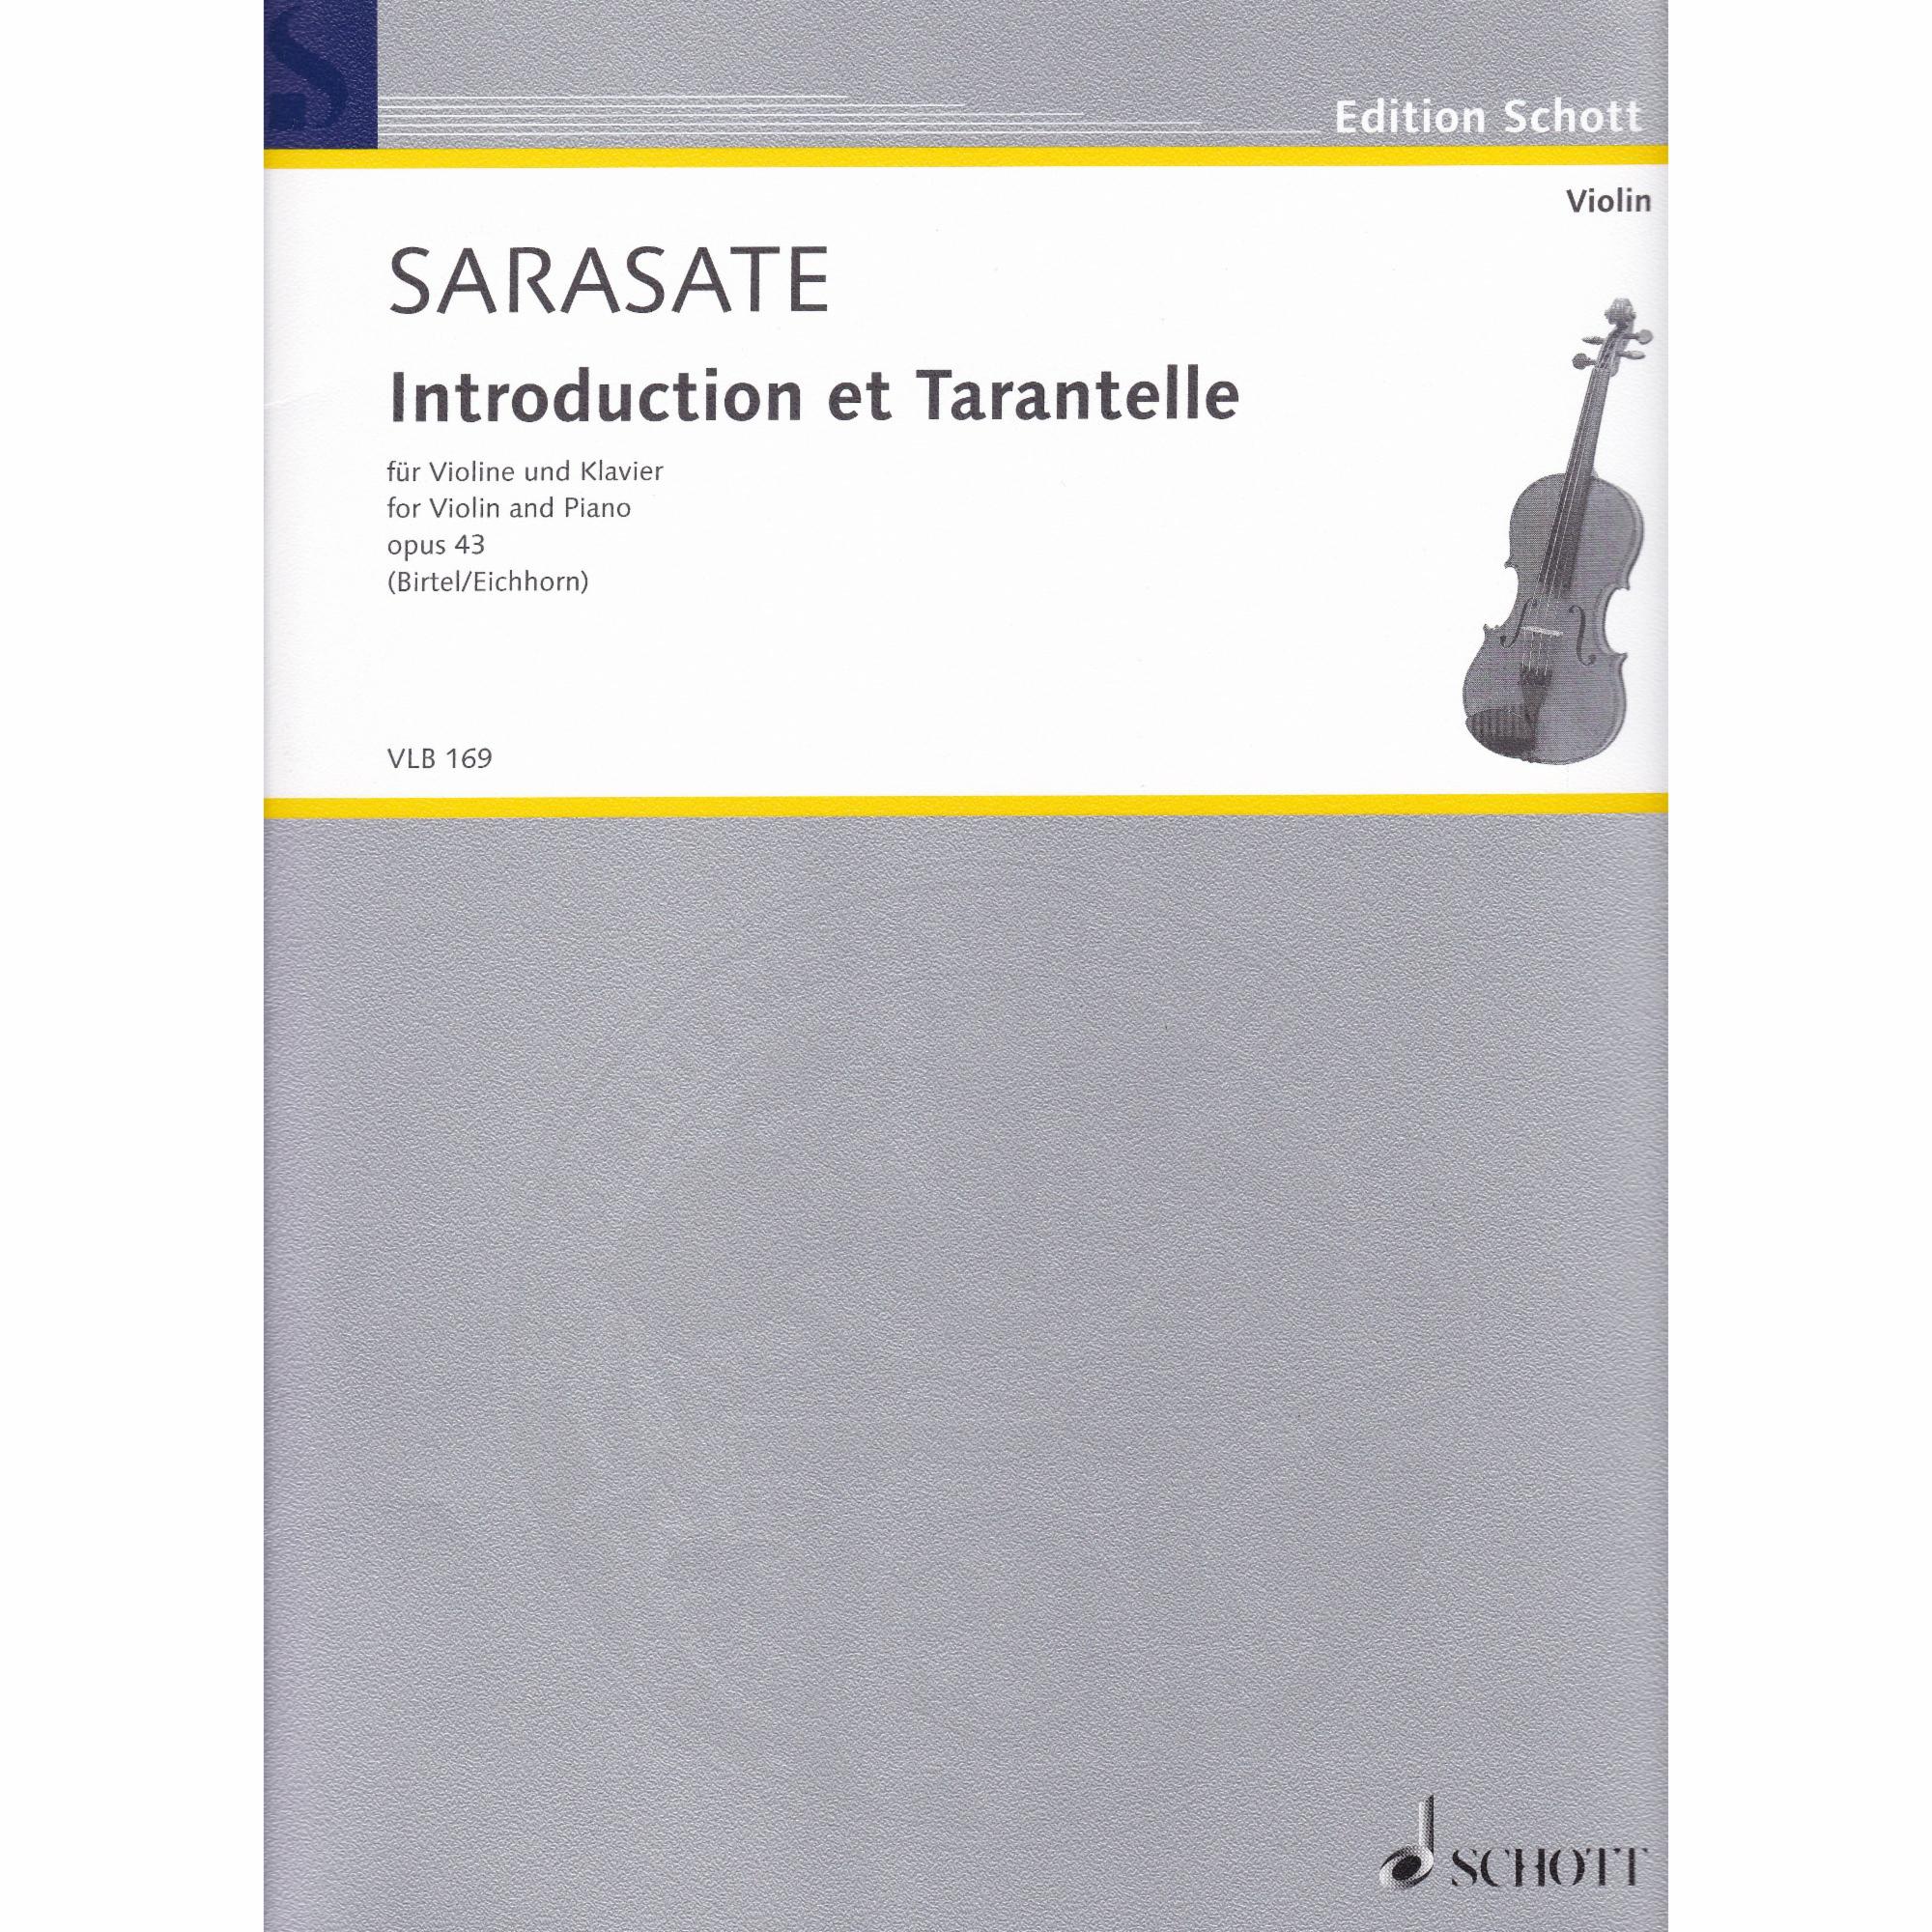 Introduction and Tarantella for Violin and Piano, Op. 43